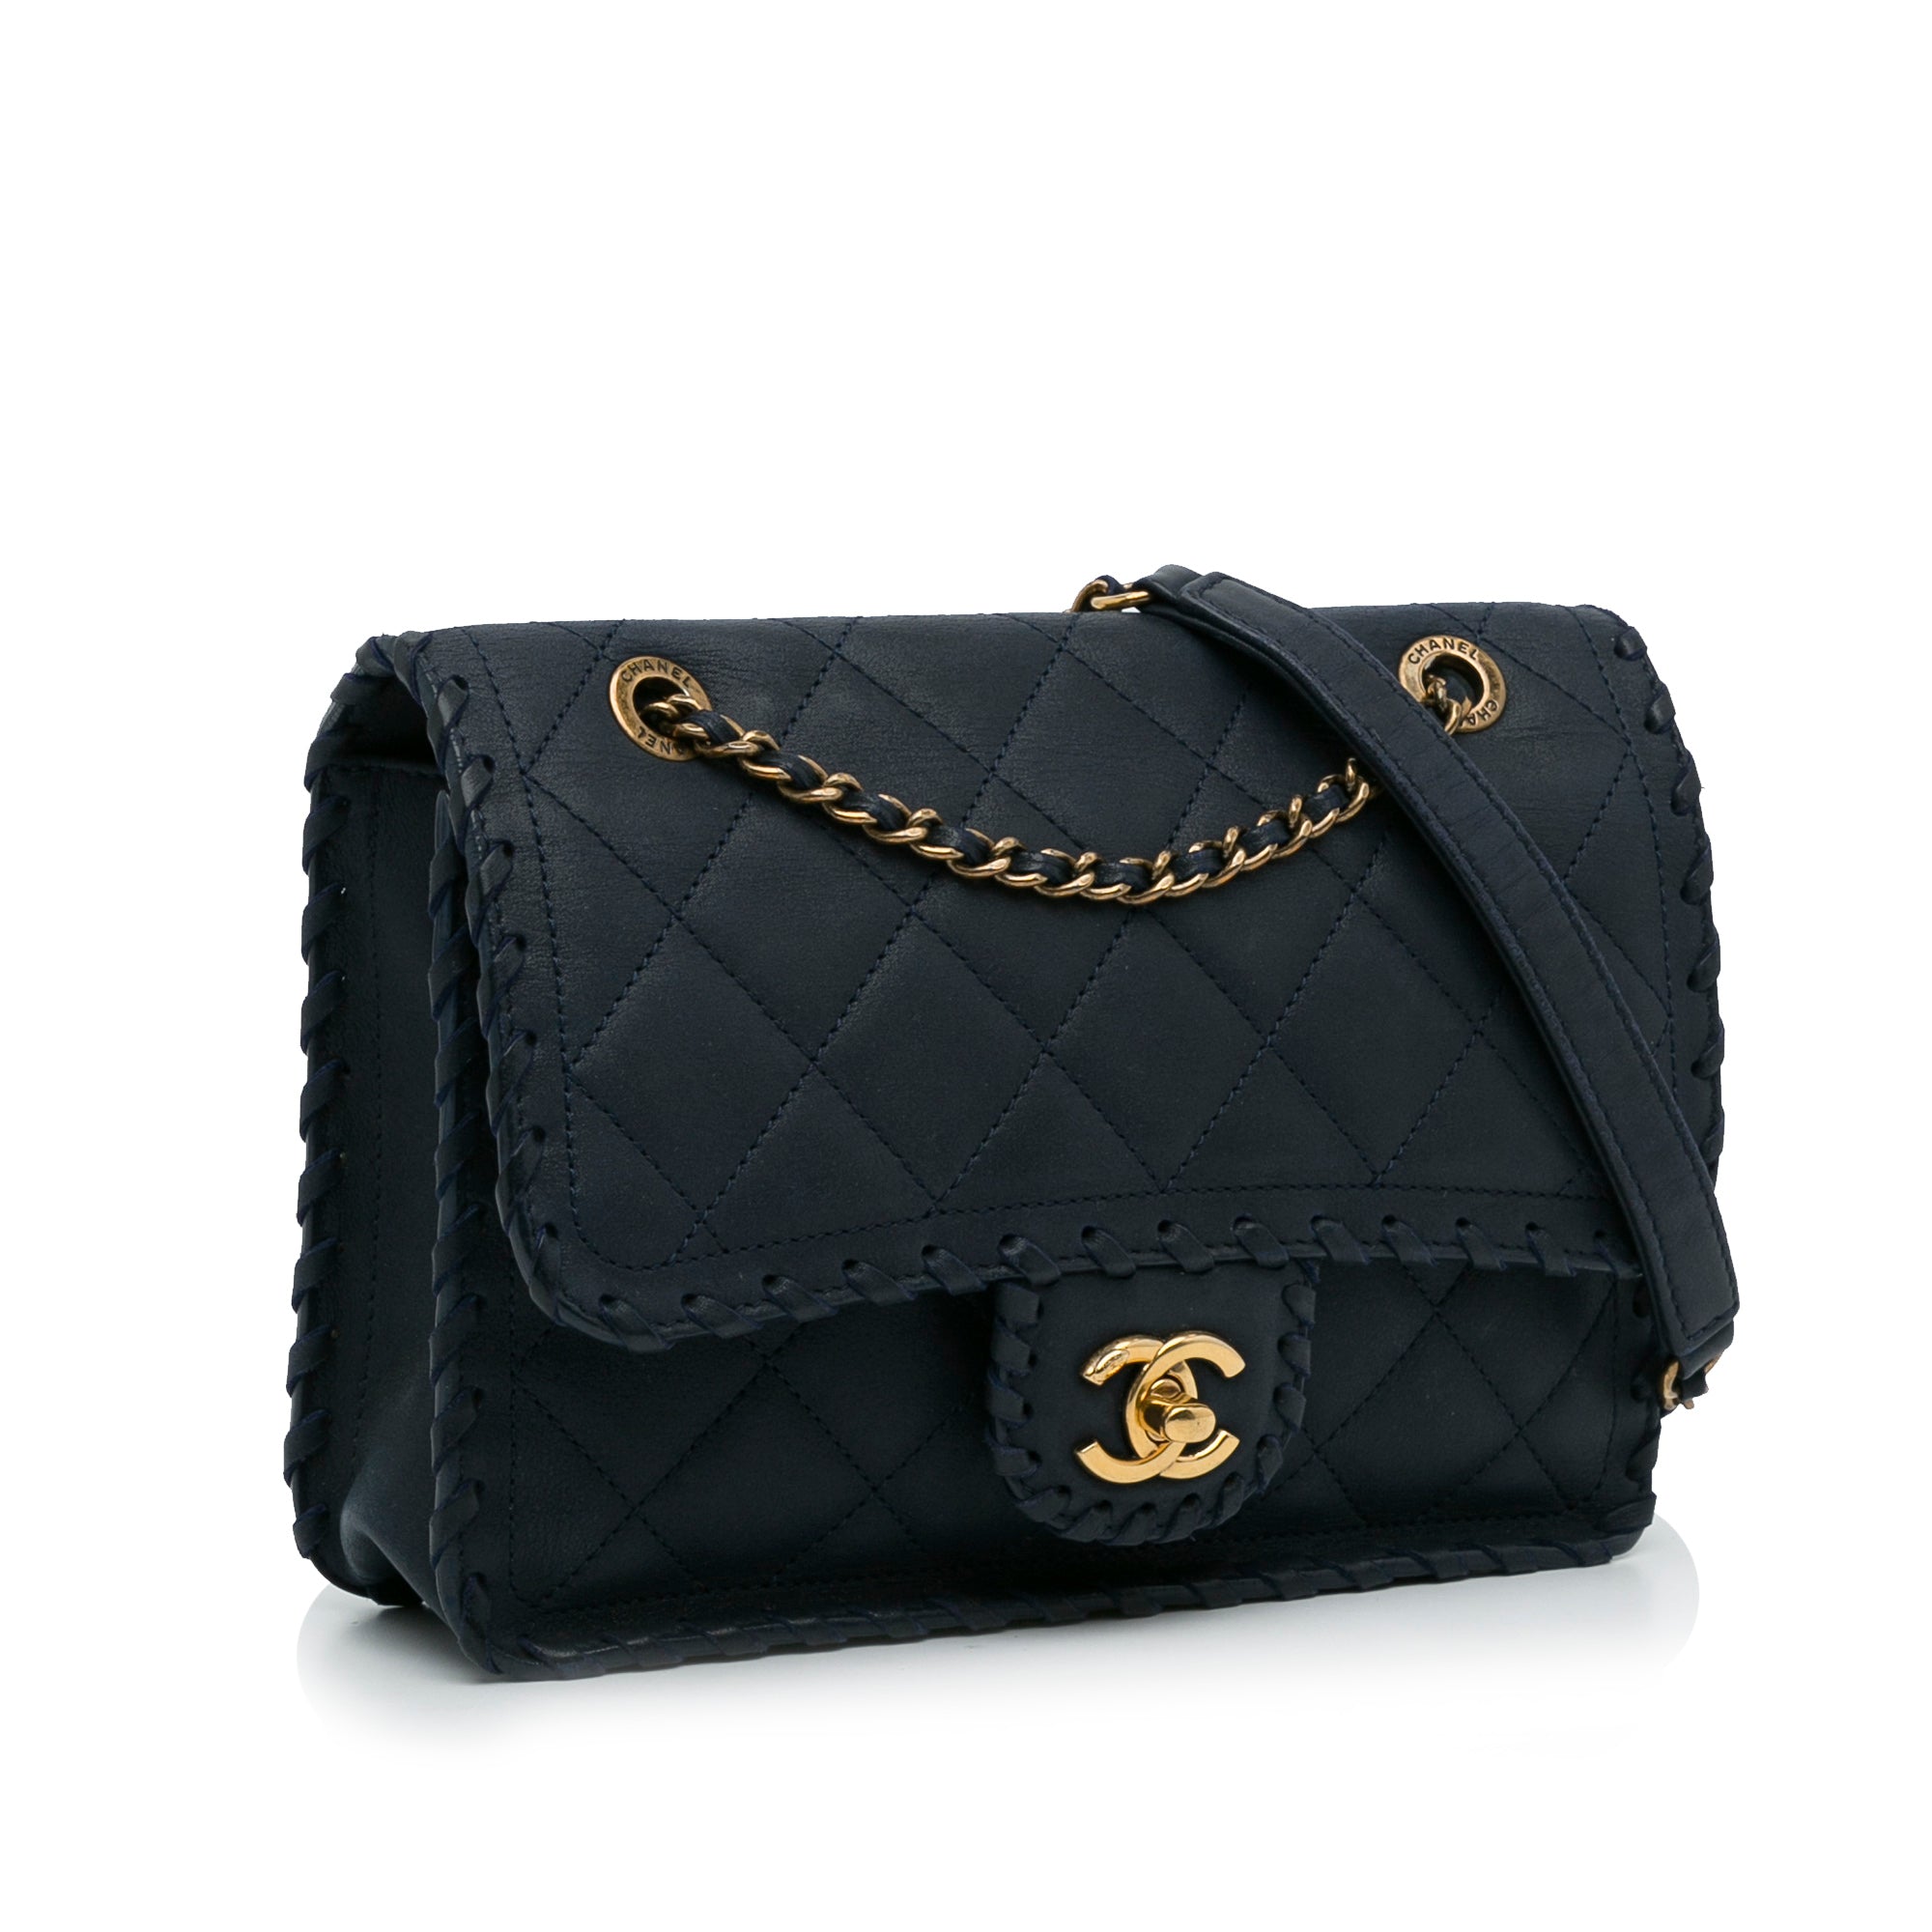 Chanel - Authenticated Gabrielle Clutch Bag - Leather Black for Women, Never Worn